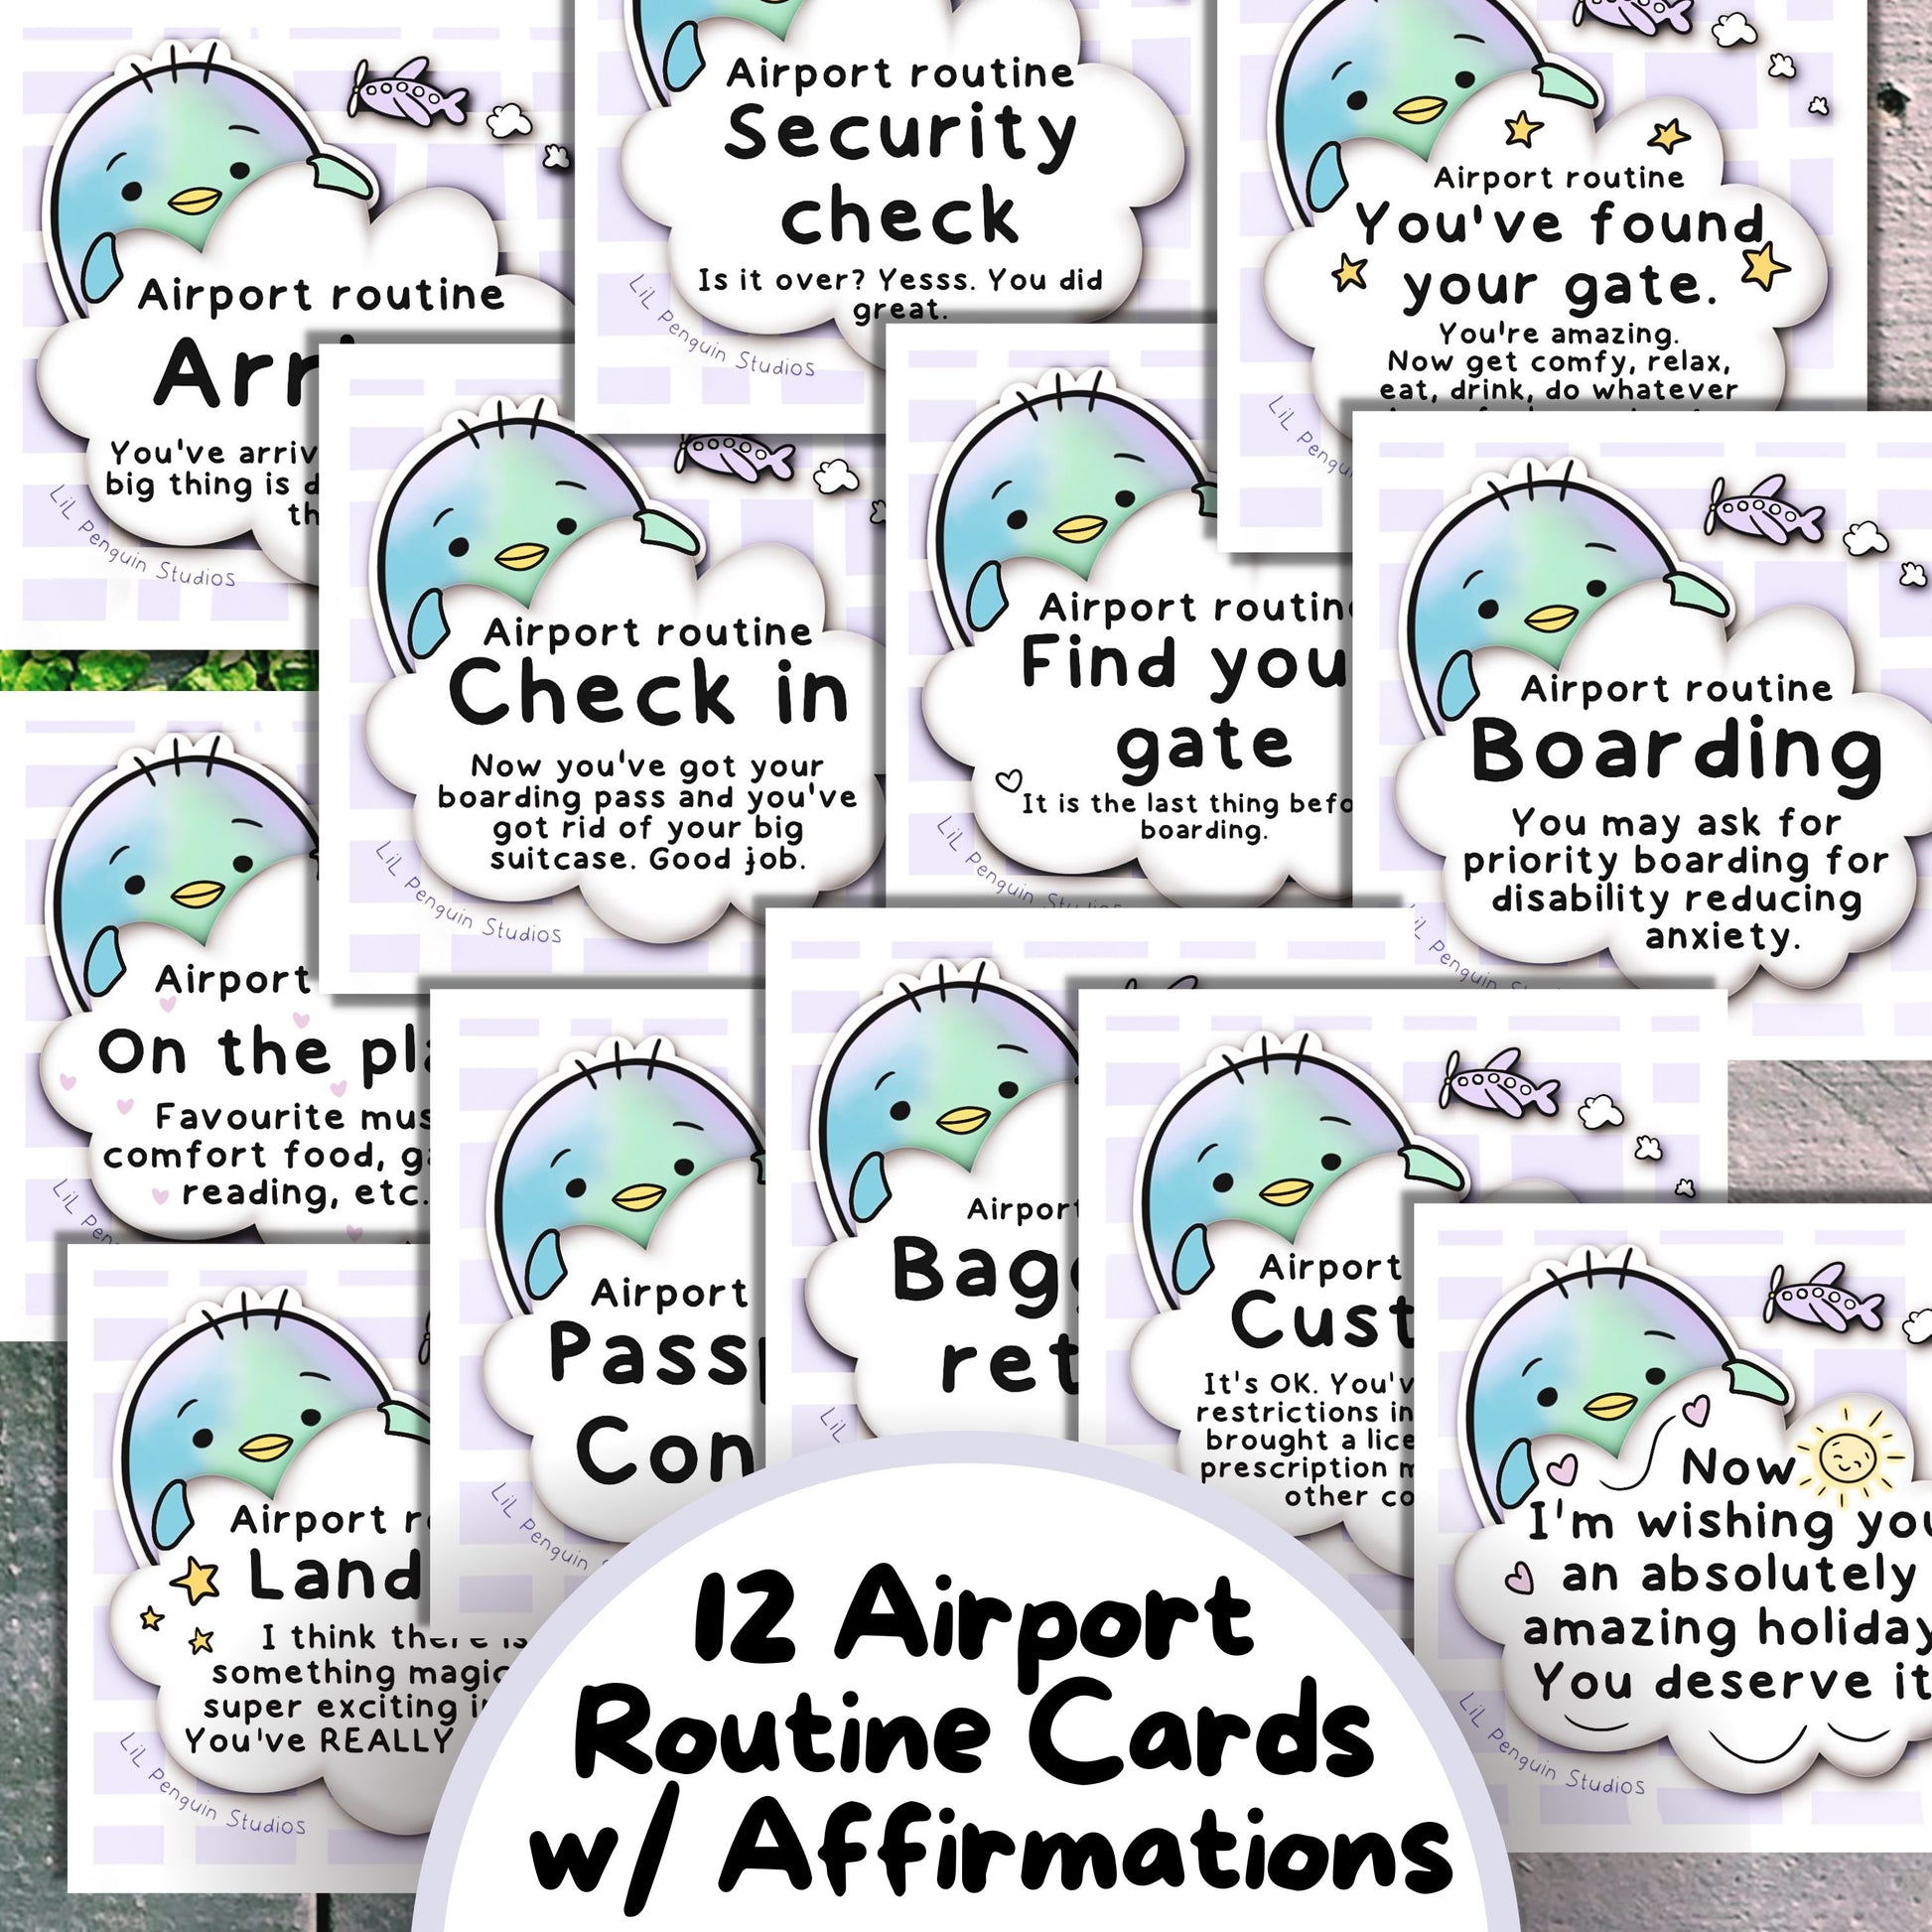 Airport routine cards with affirmations and ecouragements included in the Autism Travel Kit (communication cards, planner, journal, affirmations and more).